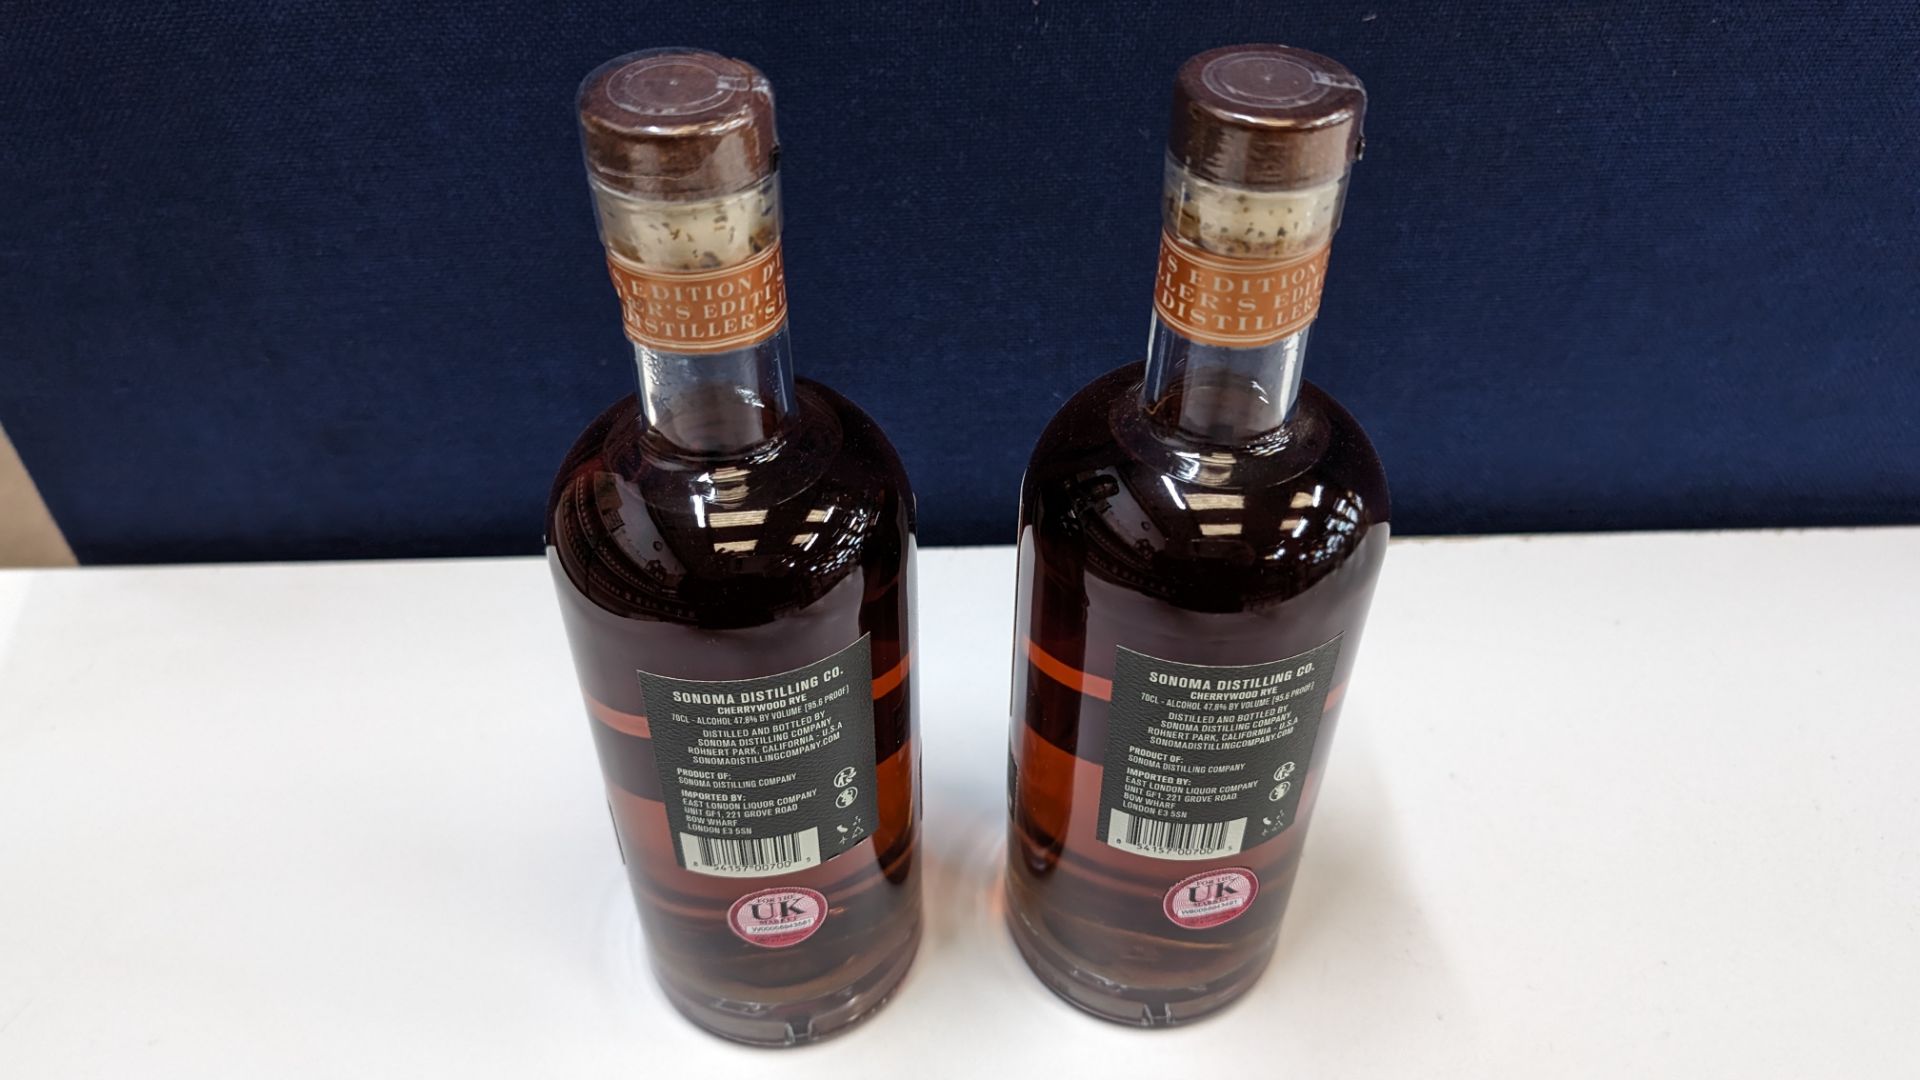 2 off 700ml bottles of Sonoma Cherrywood Rye Whiskey. 47.8% alc/vol (95.6 proof). Distilled and bo - Image 3 of 6